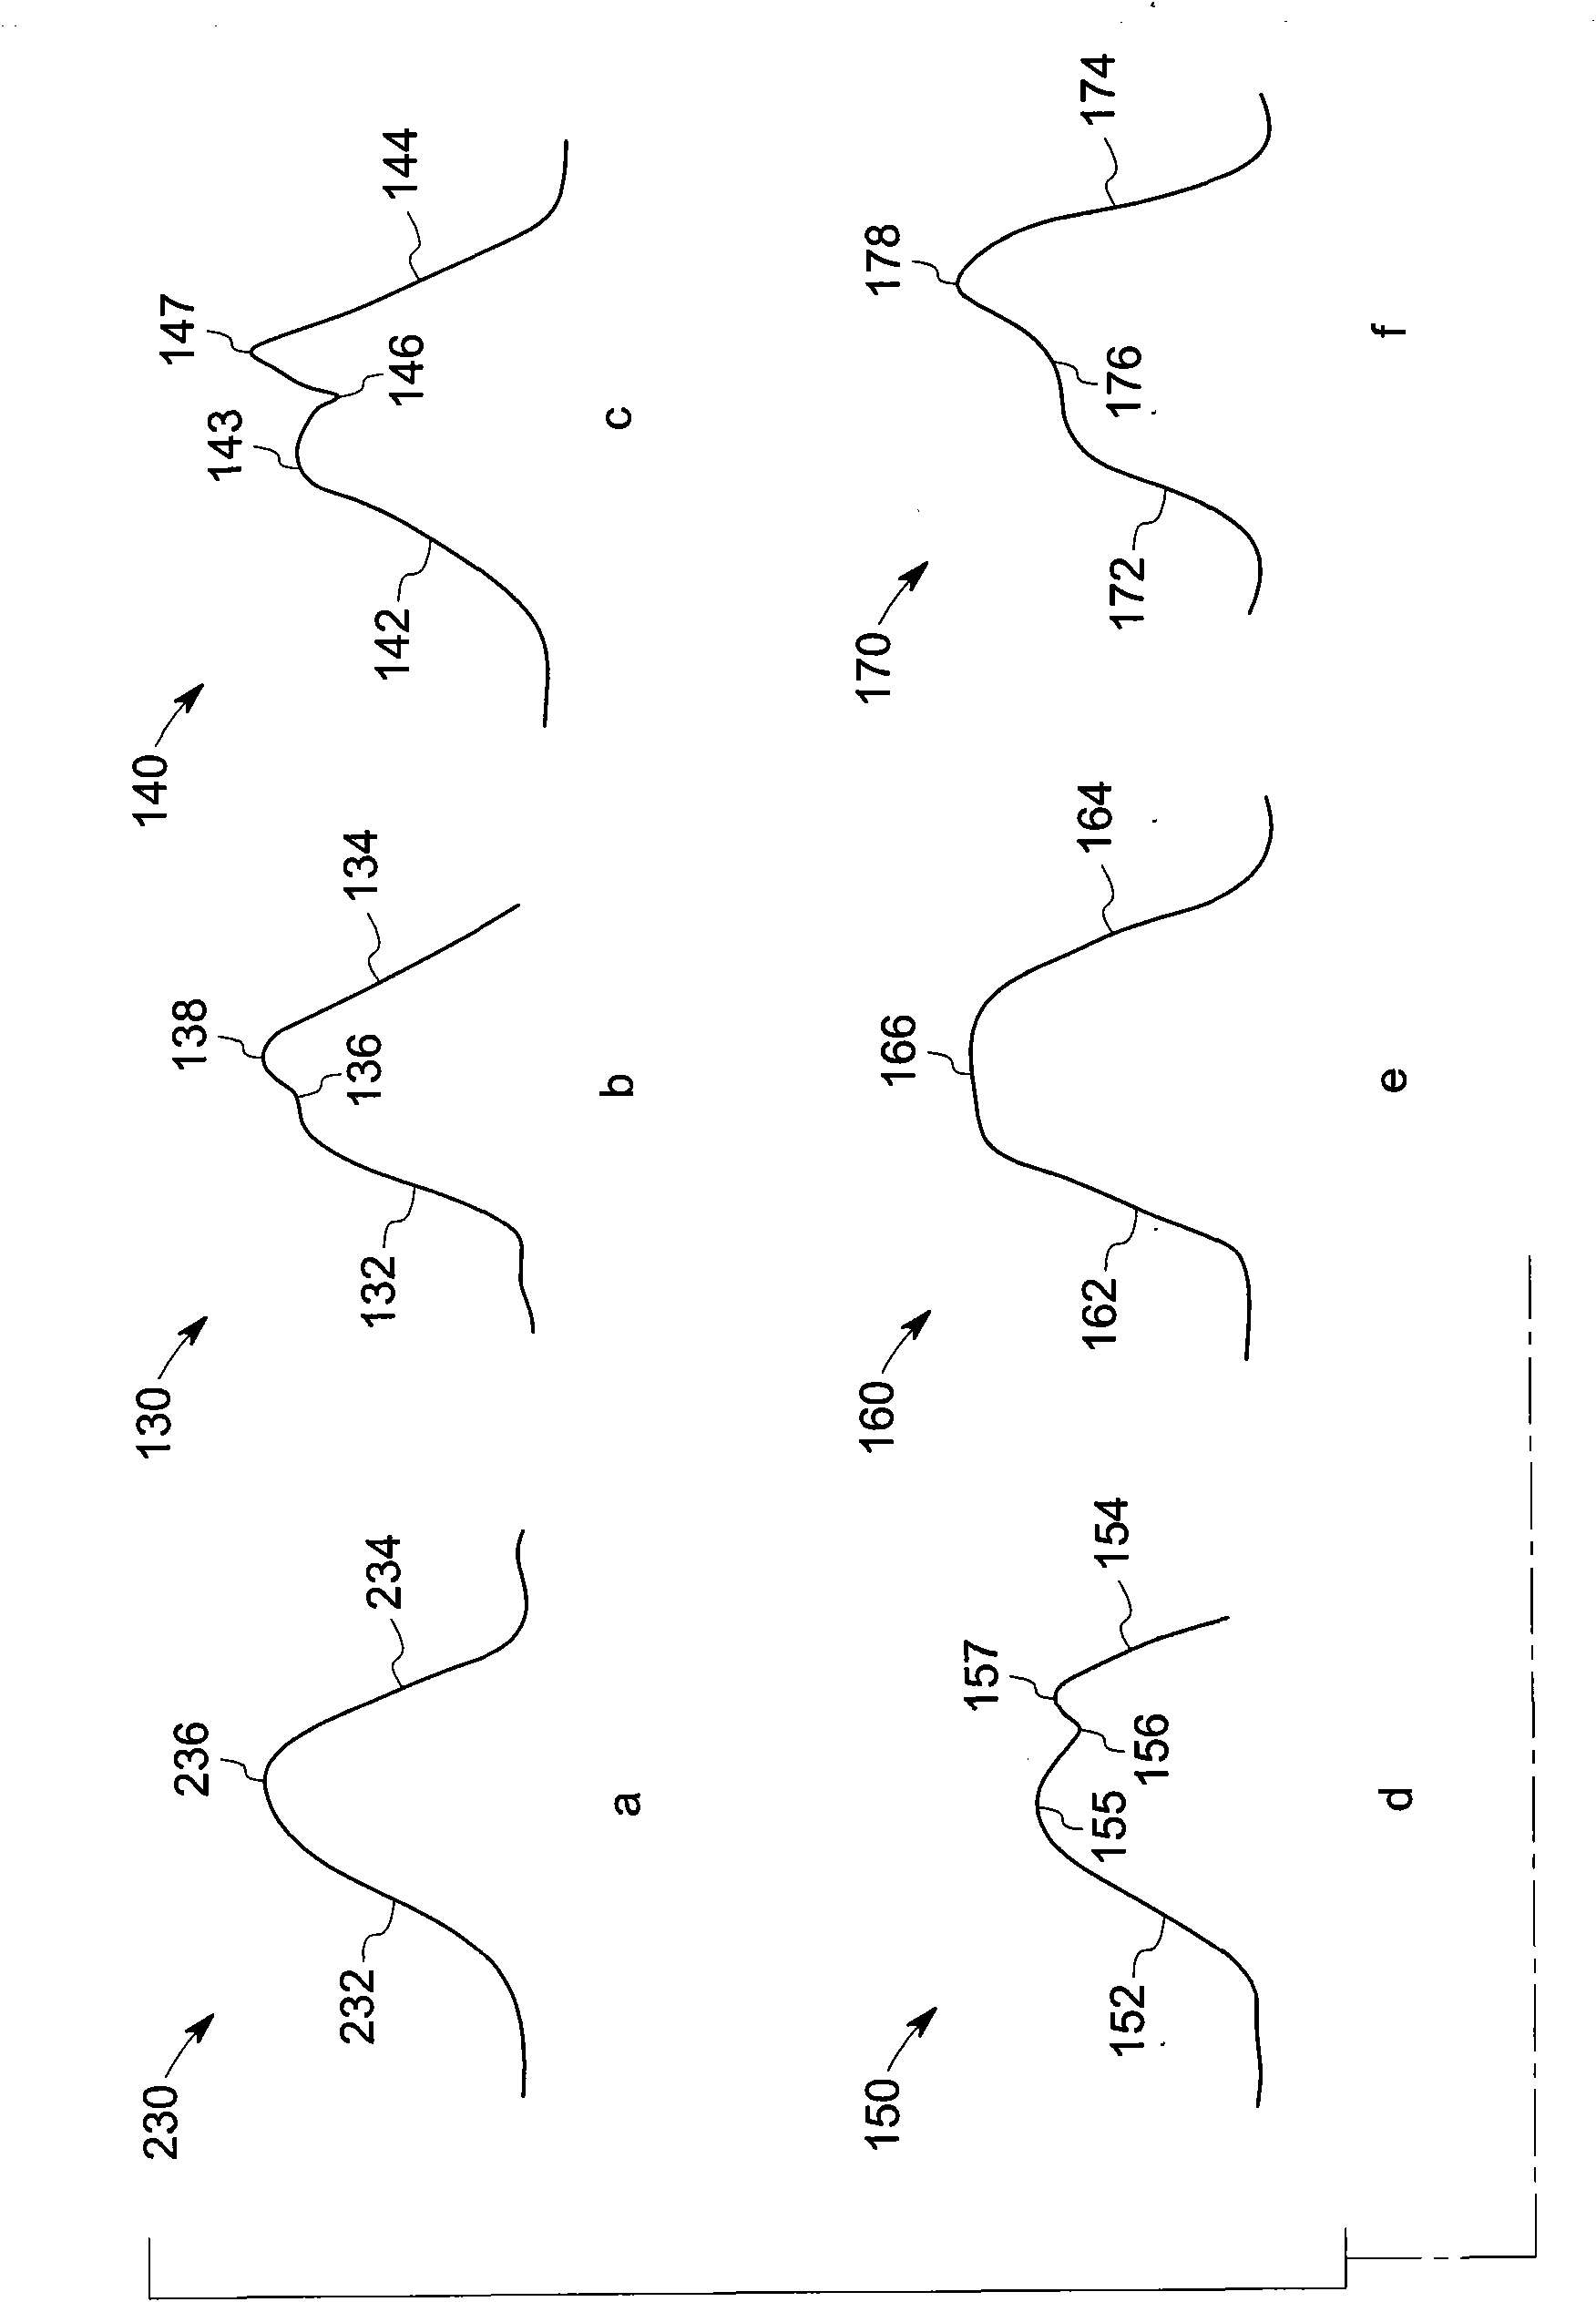 Detection method and system for detecting peak point of T waves as well as electrocardio monitoring system